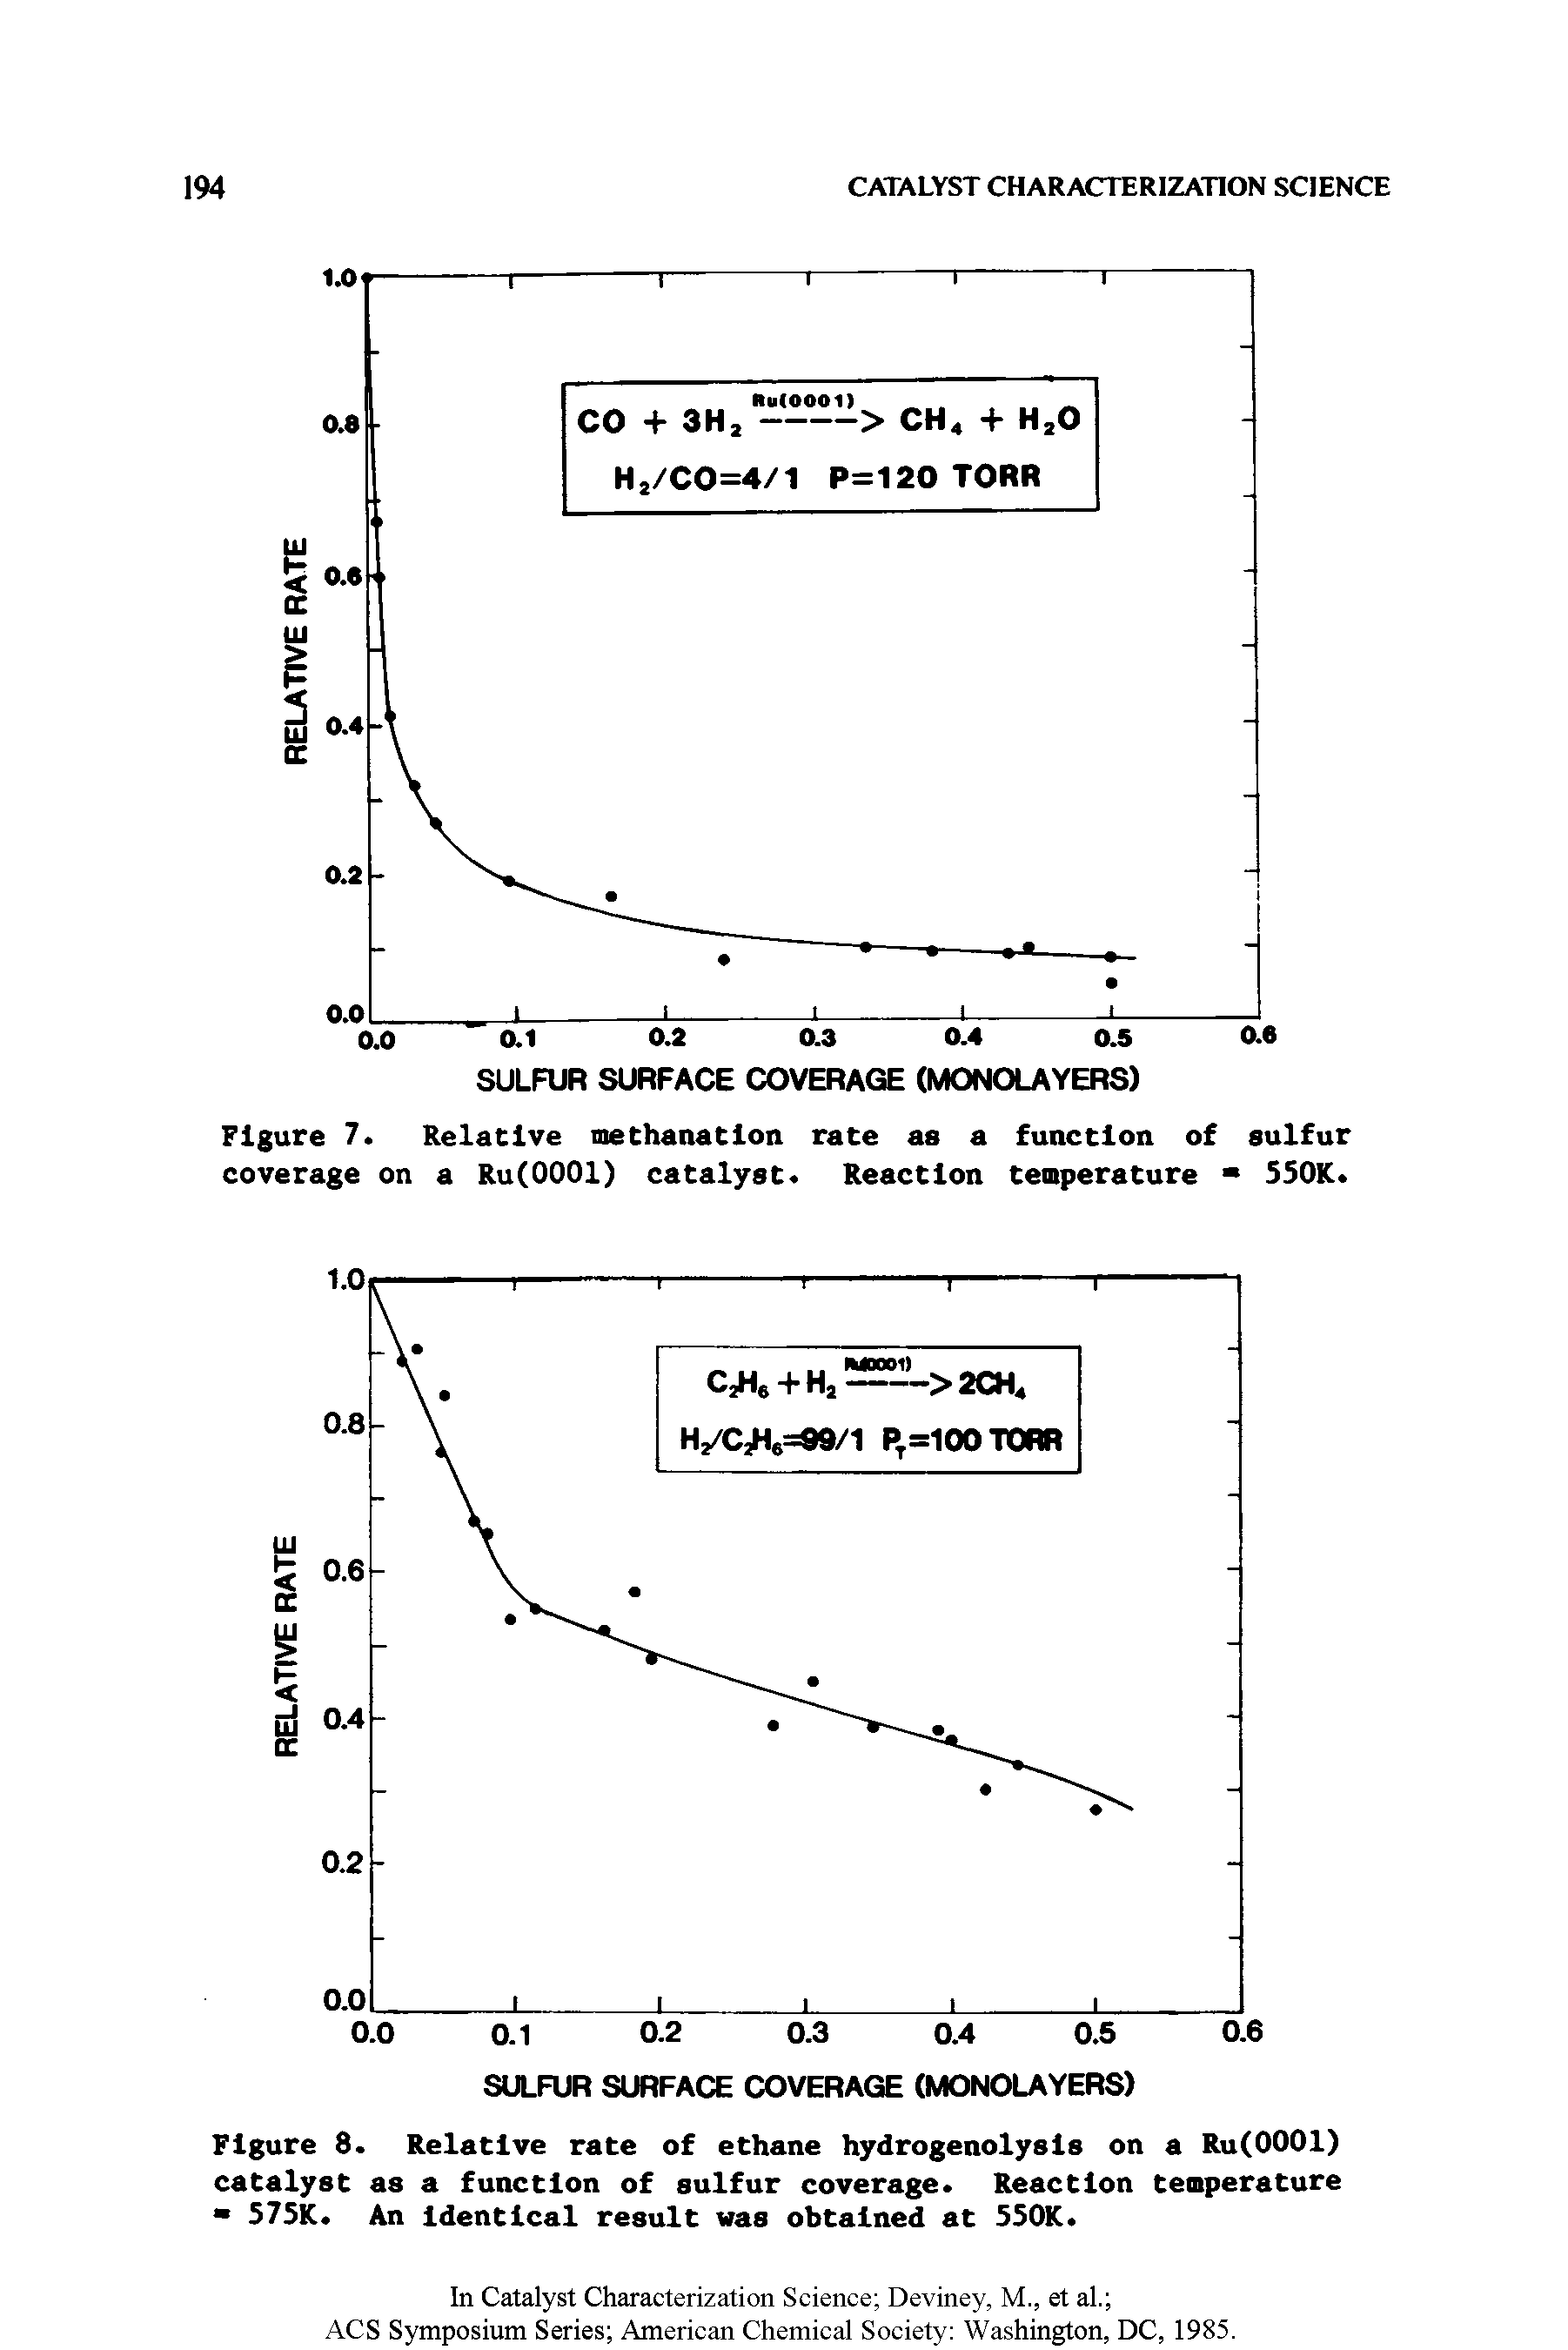 Figure 7. Relative methanatlon rate as a function of sulfur coverage on a Ru(OOOl) catalyst. Reaction temperature 550K.